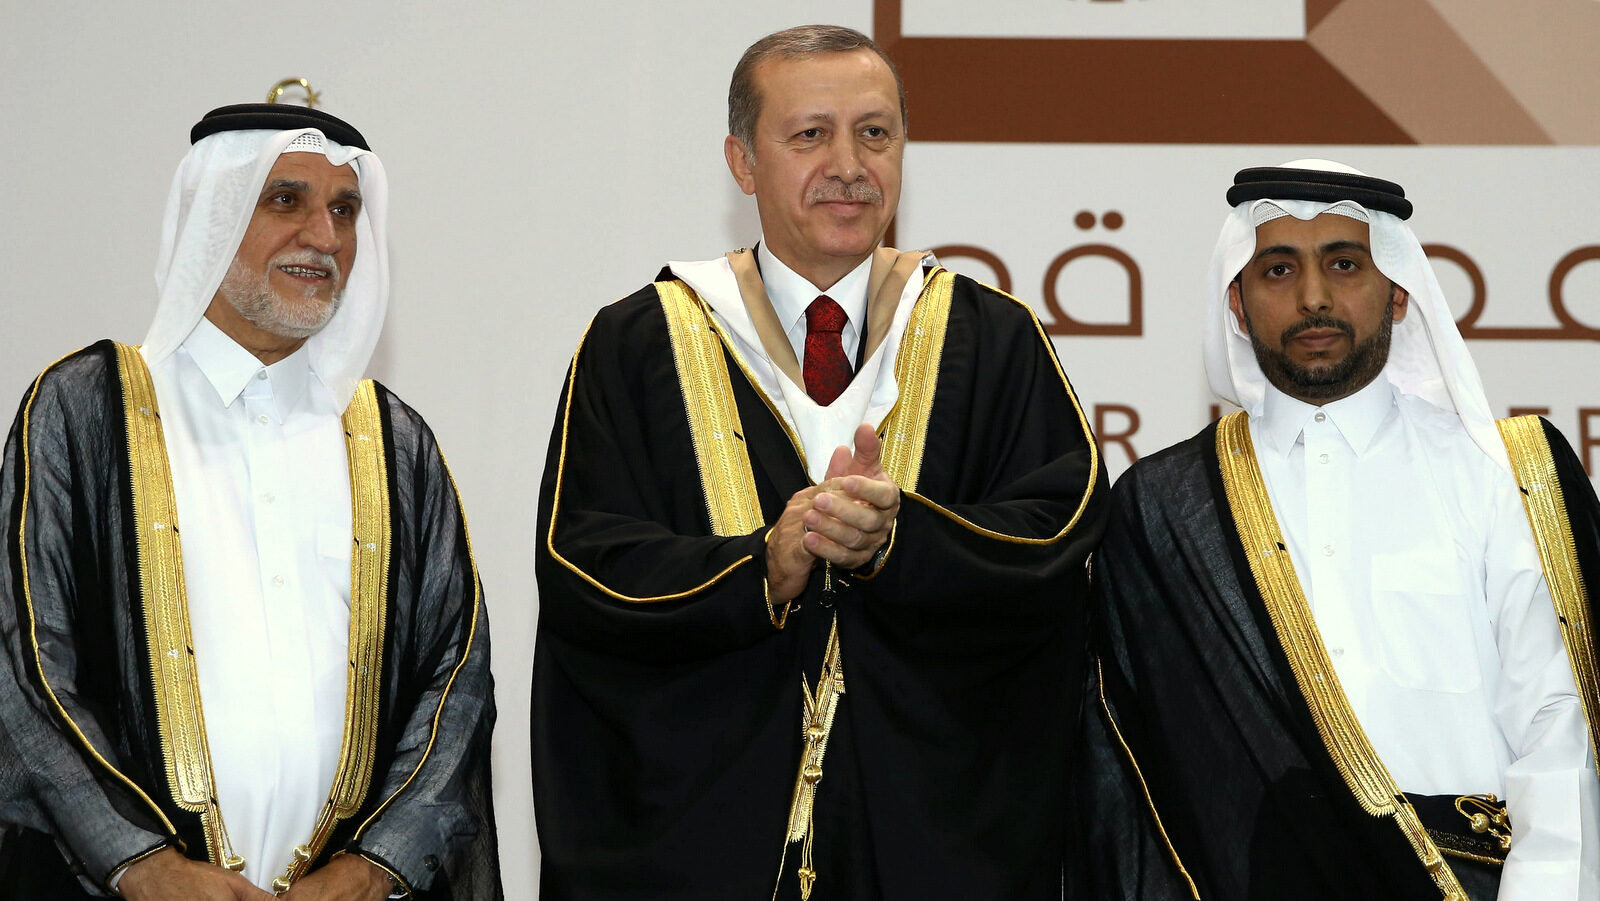 Turkey's President Recep Tayyip Erdogan applauds after he received an honorary doctorate from Qatar University in Doha, Qatar, Dec. 2, 2015. Turkey and Qatar are two of the main benefactors of the Syrian rebels. (AP Photo)